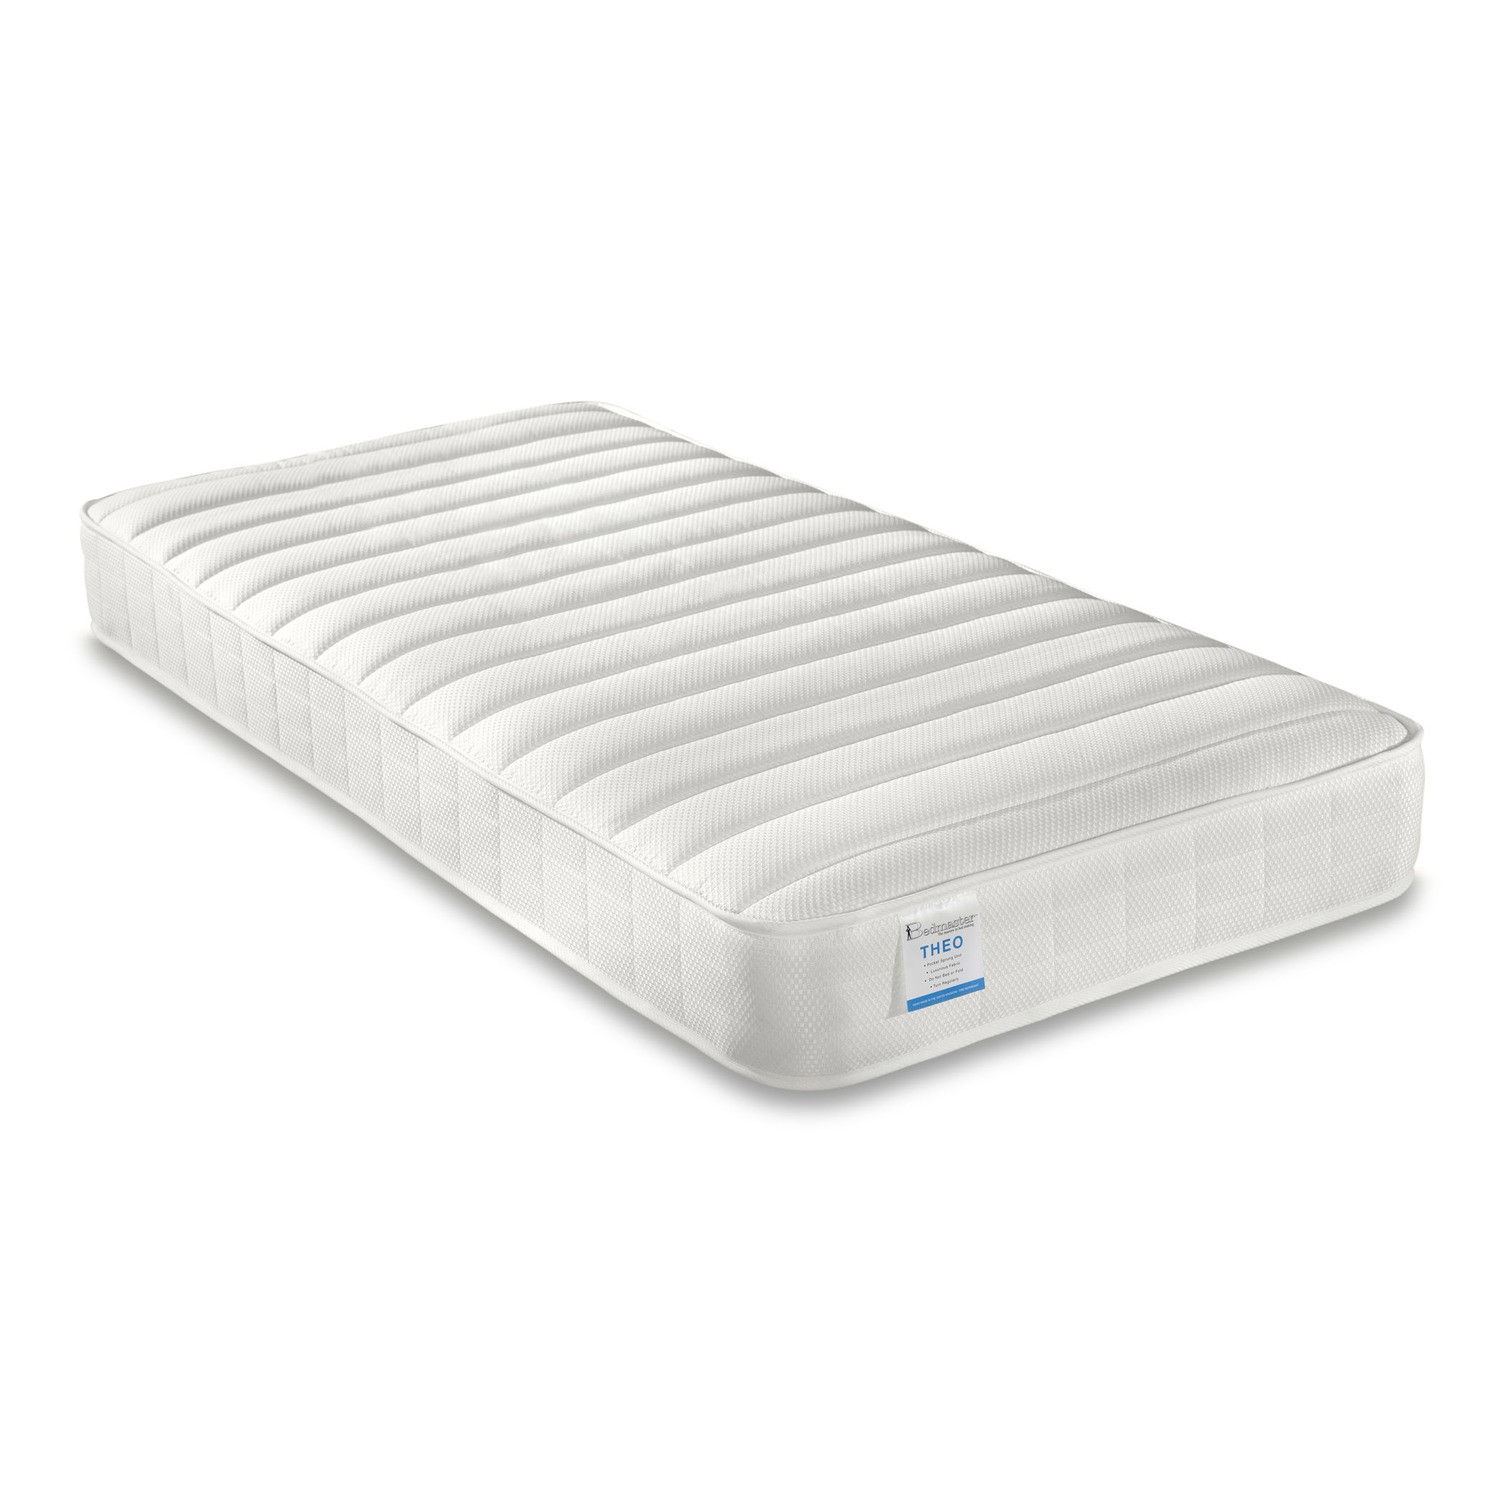 Read more about Single + single pocket sprung bunk bed mattresses theo